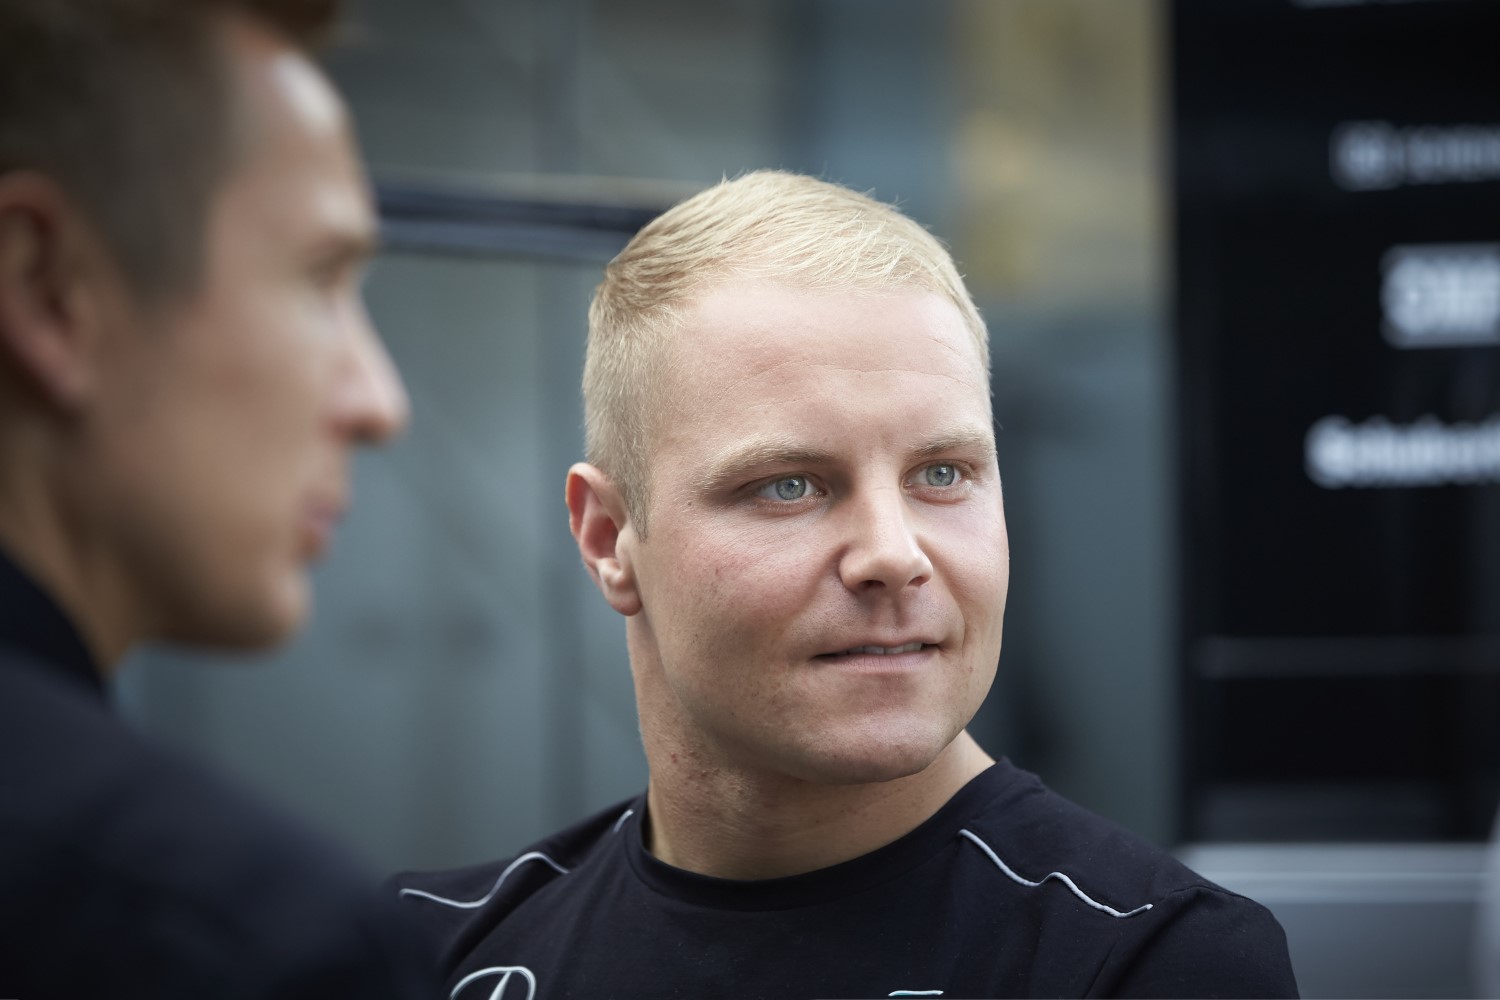 Bottas is clear #2 now